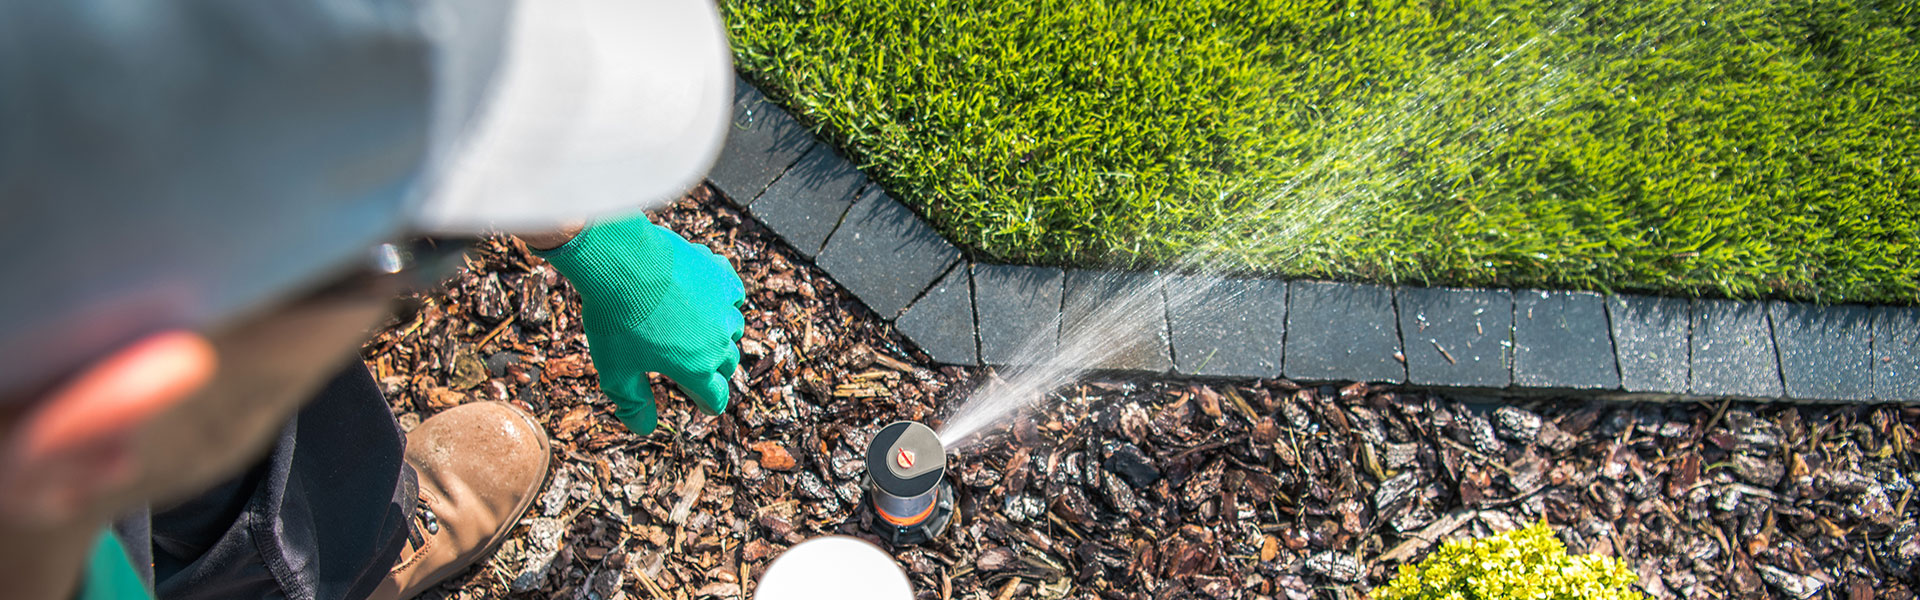 Optimum Irrigation is highly experienced in repairing all types of residential irrigation systems.